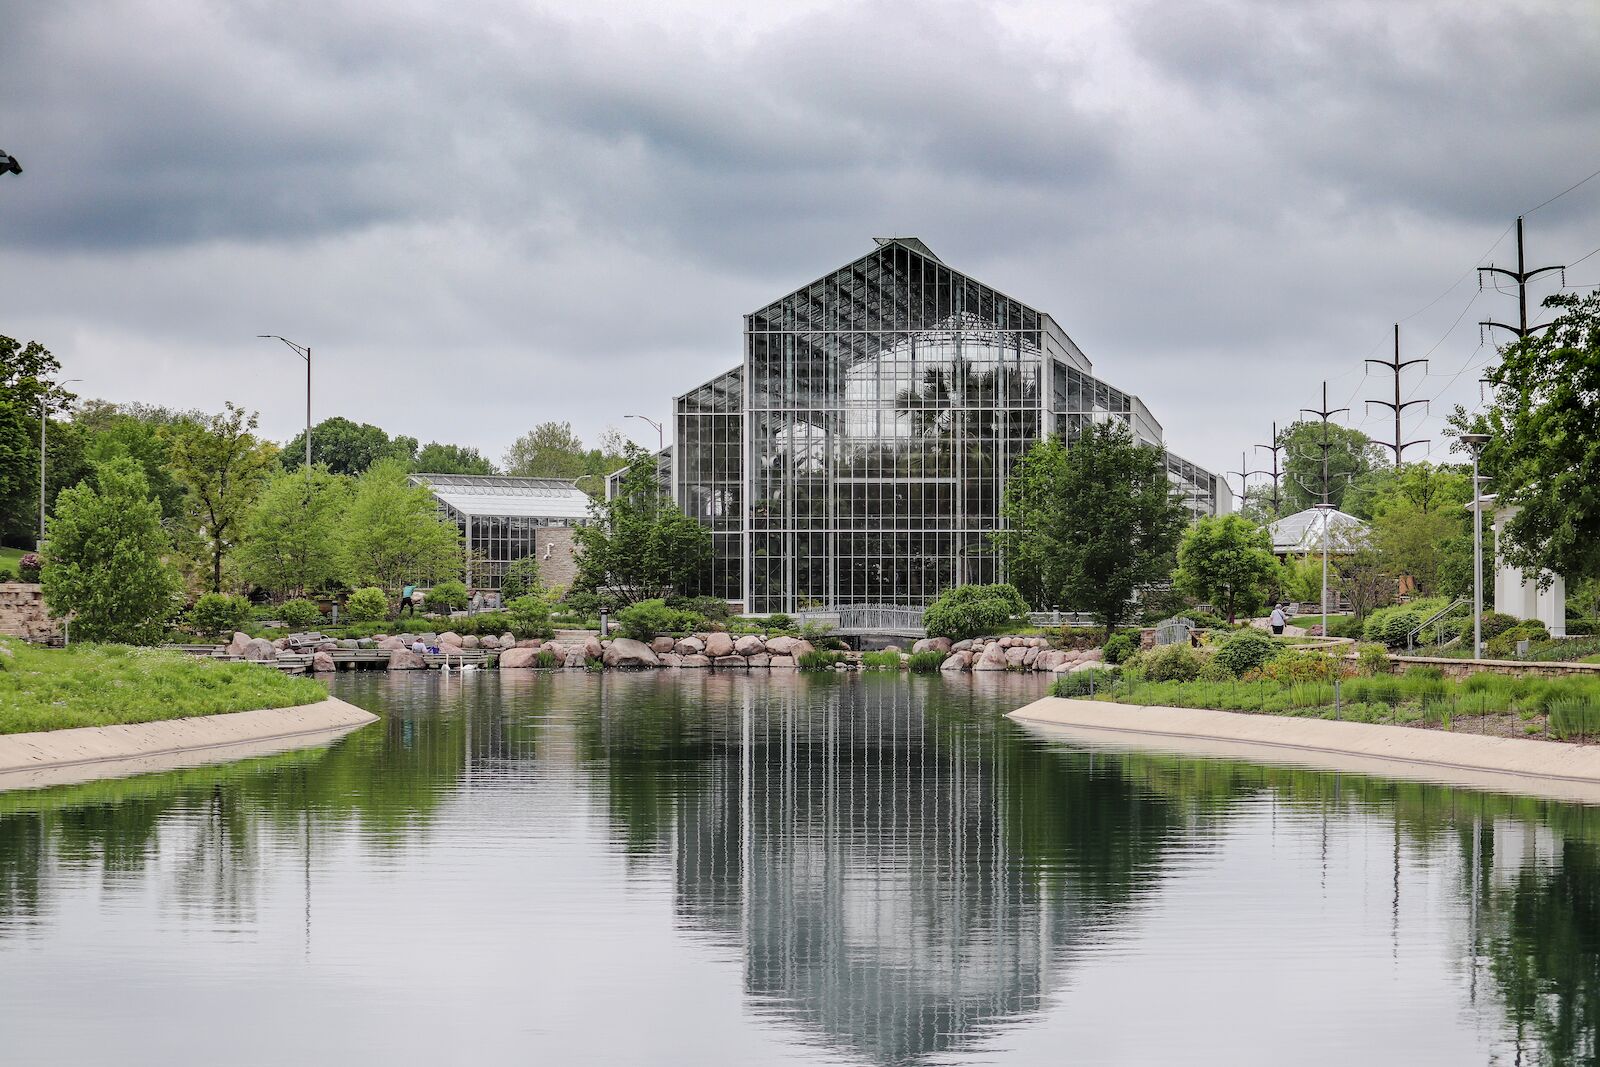 Rockford Illinois May 12 2018 NICHOLAS CONSERVATORY & GARDENS big glass house over looking lake